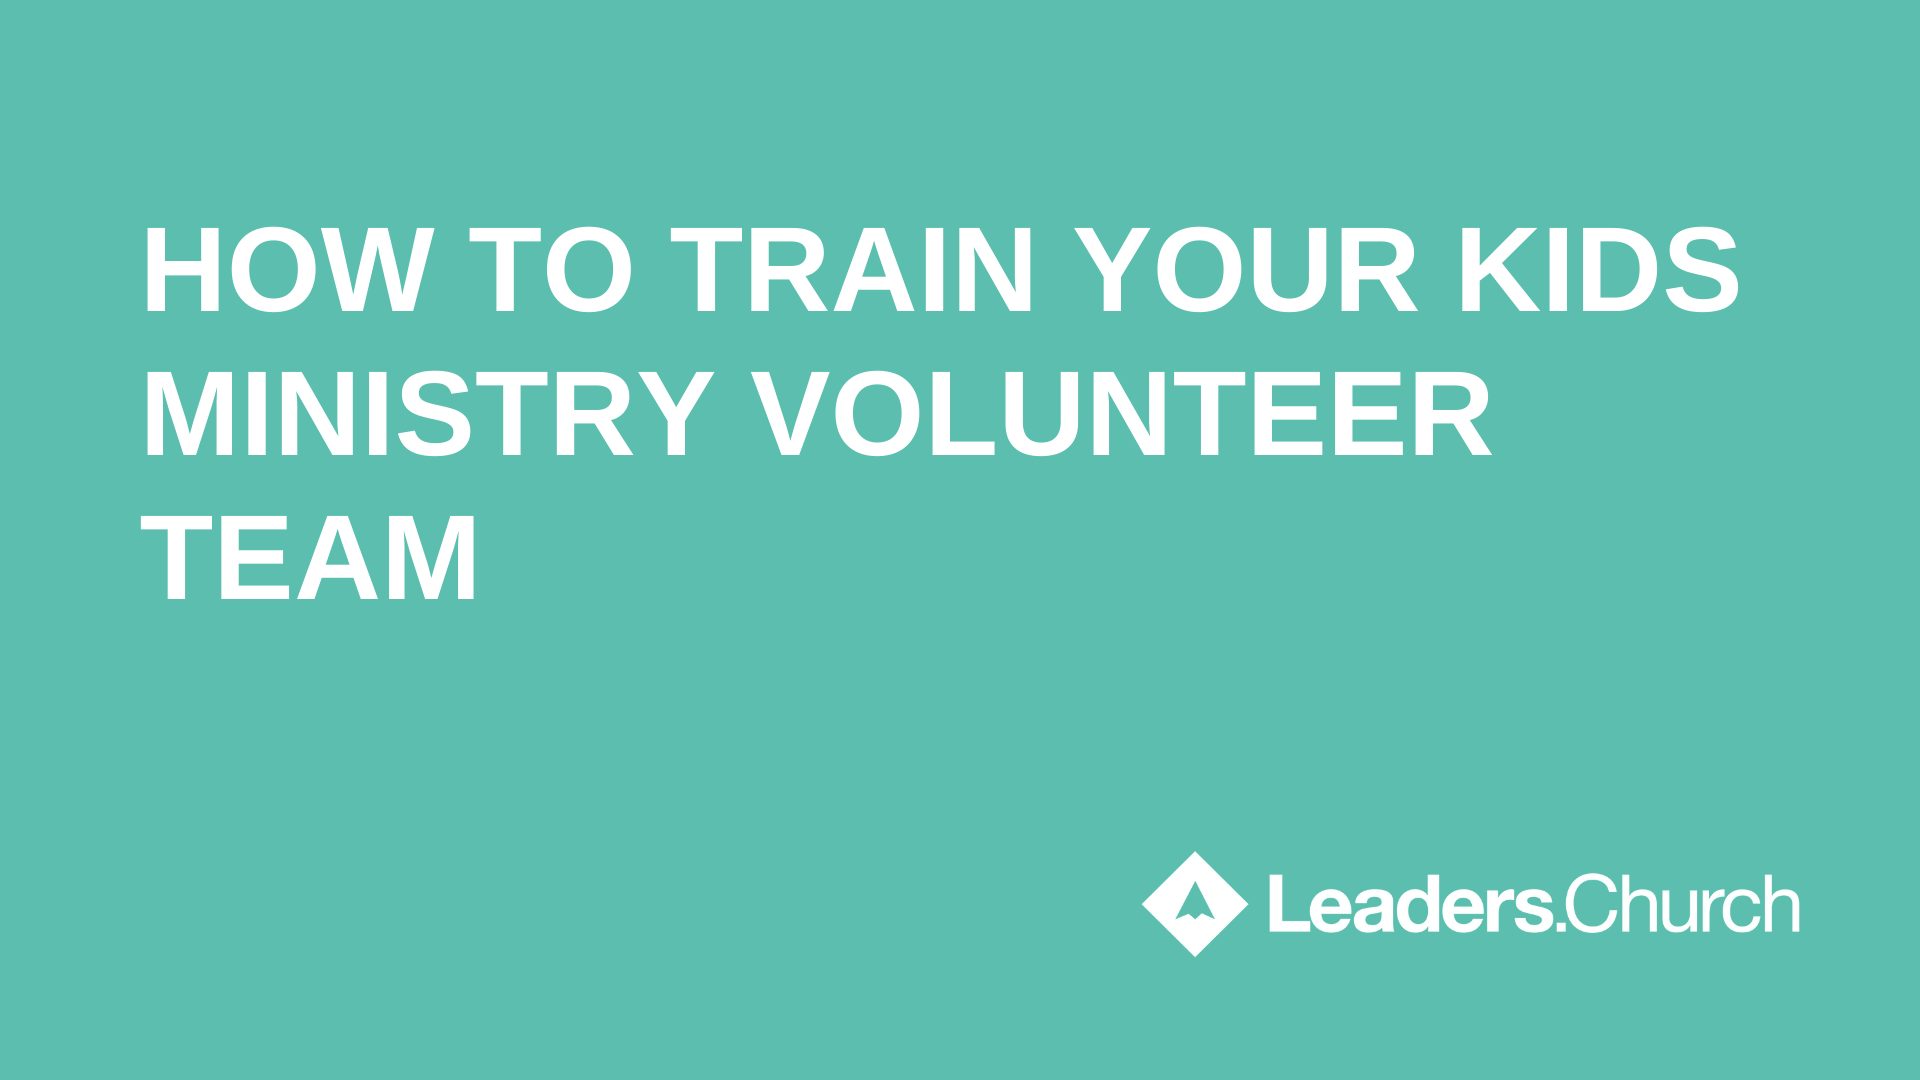 How to Train Your Kids Ministry Volunteer Team - Leaders.Church